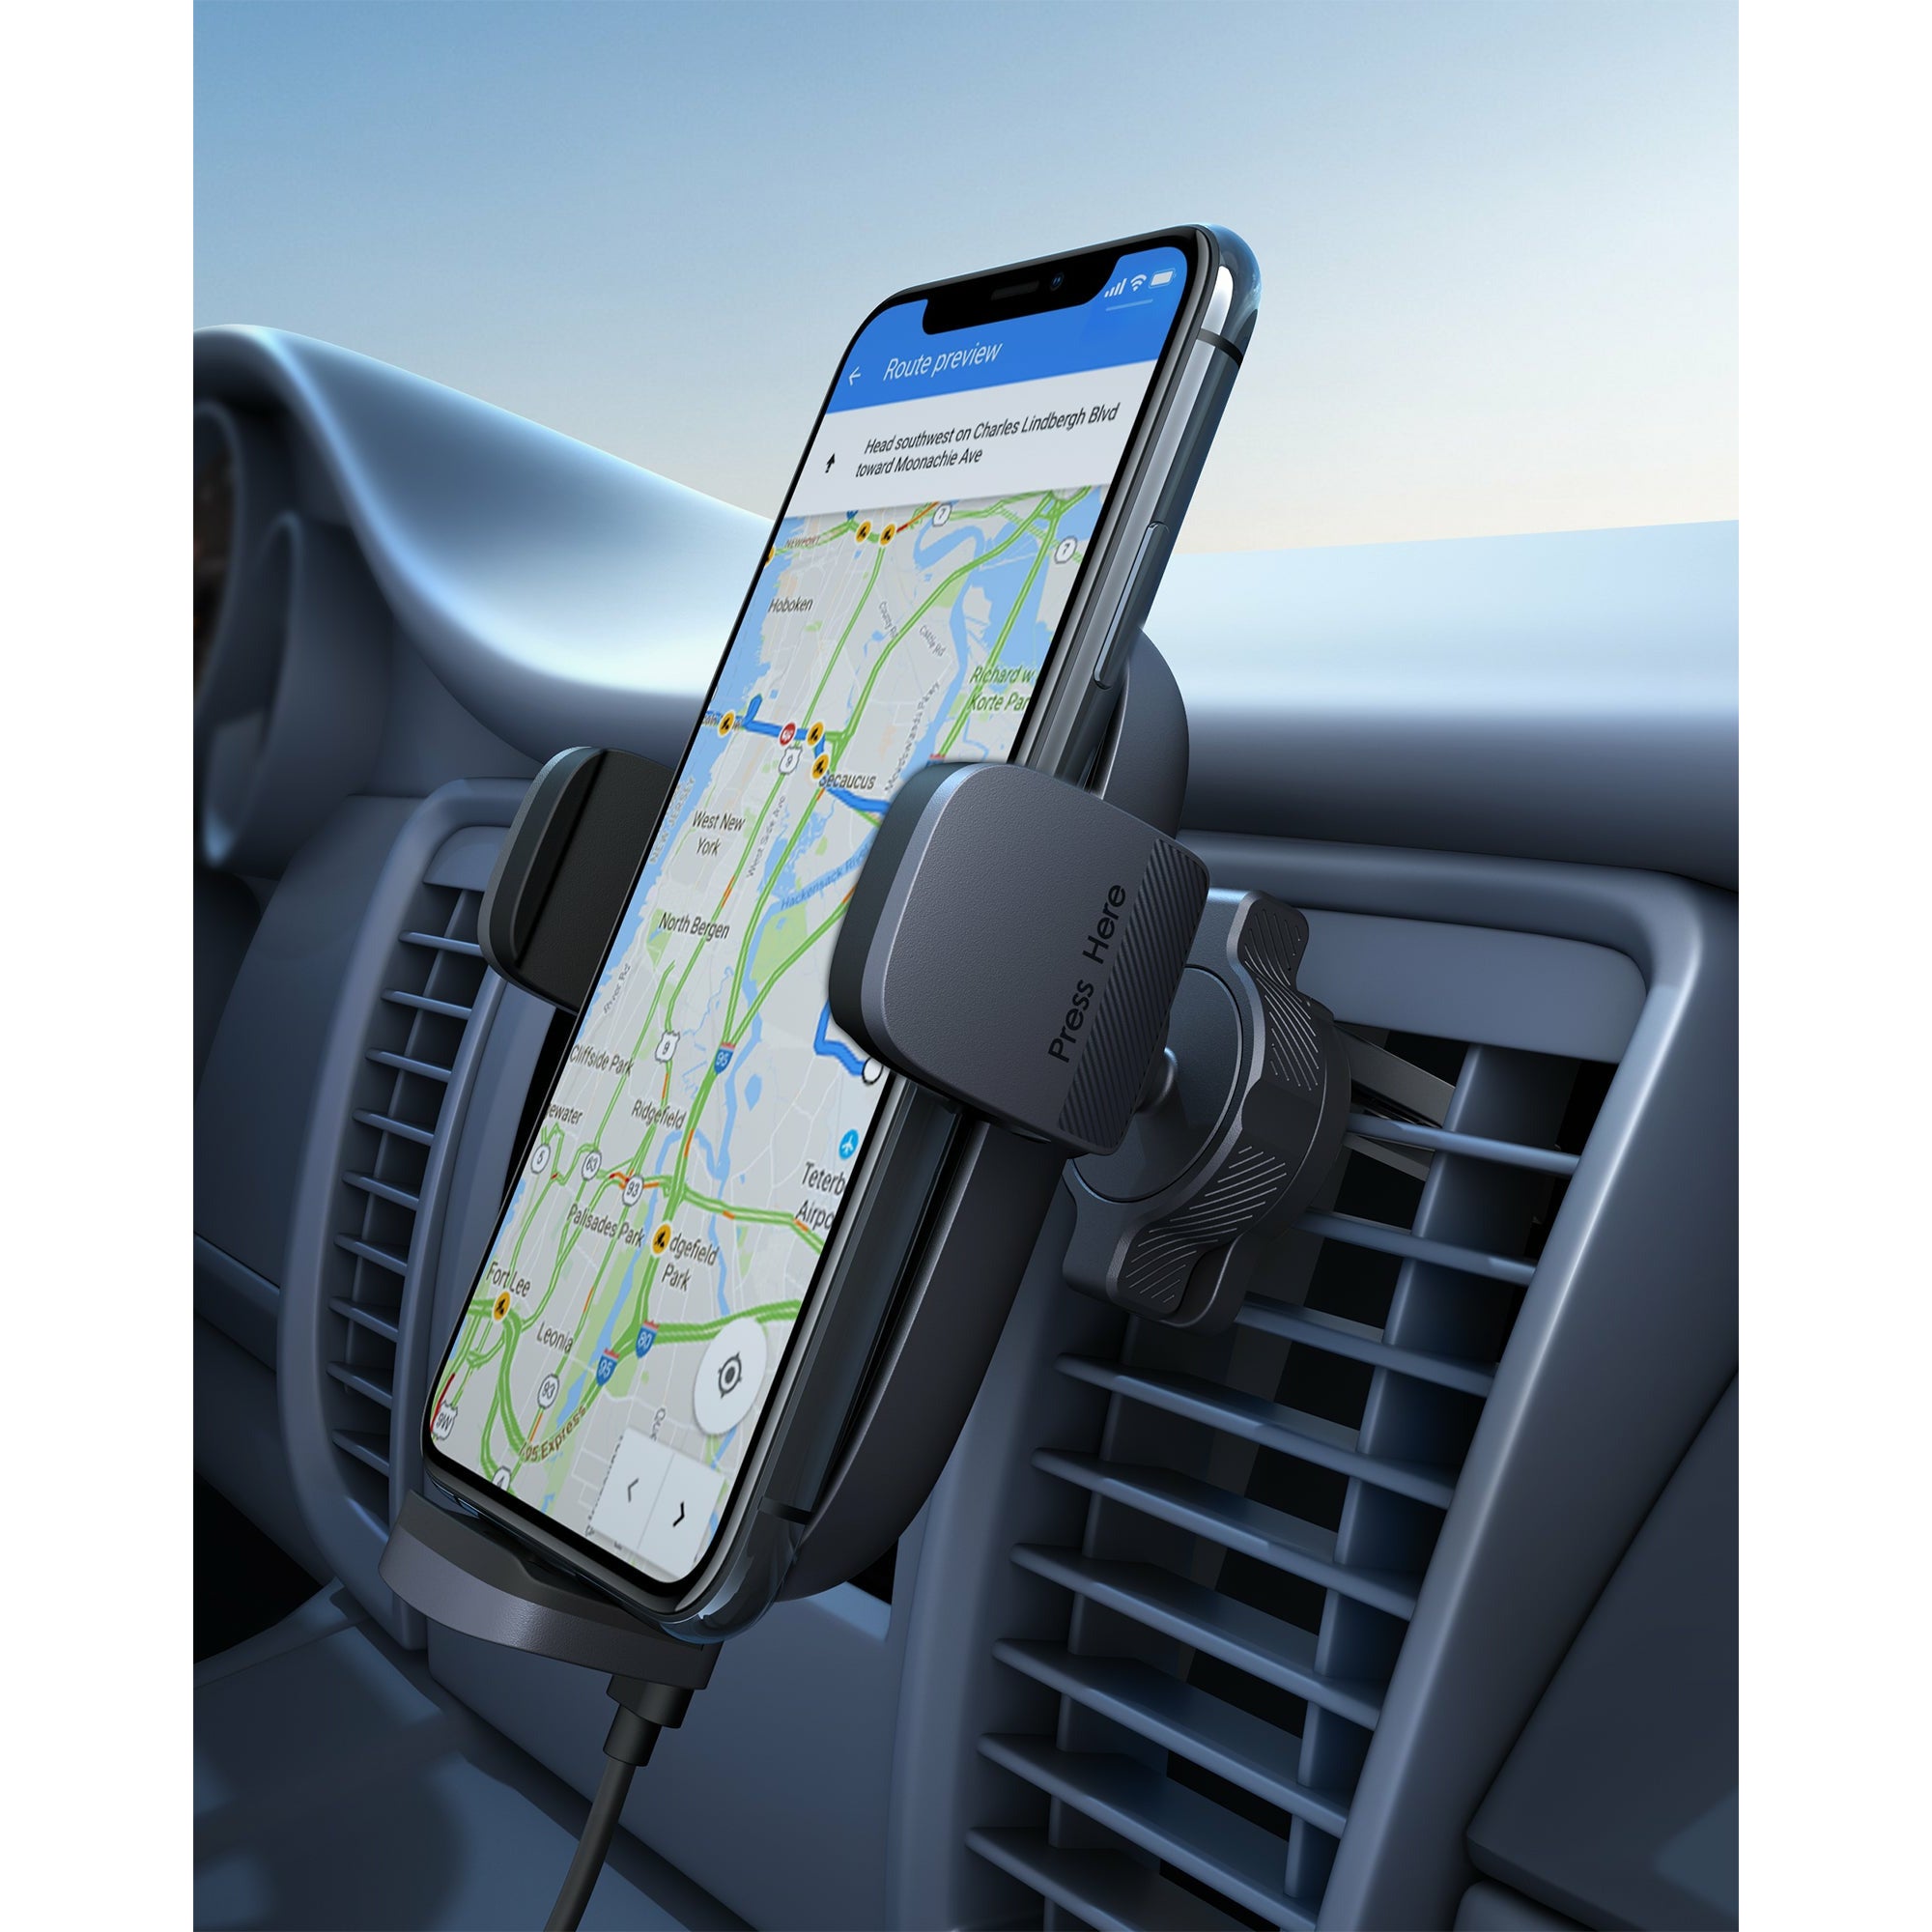 AUKEY Wireless Charger Car Phone Holder HD C60